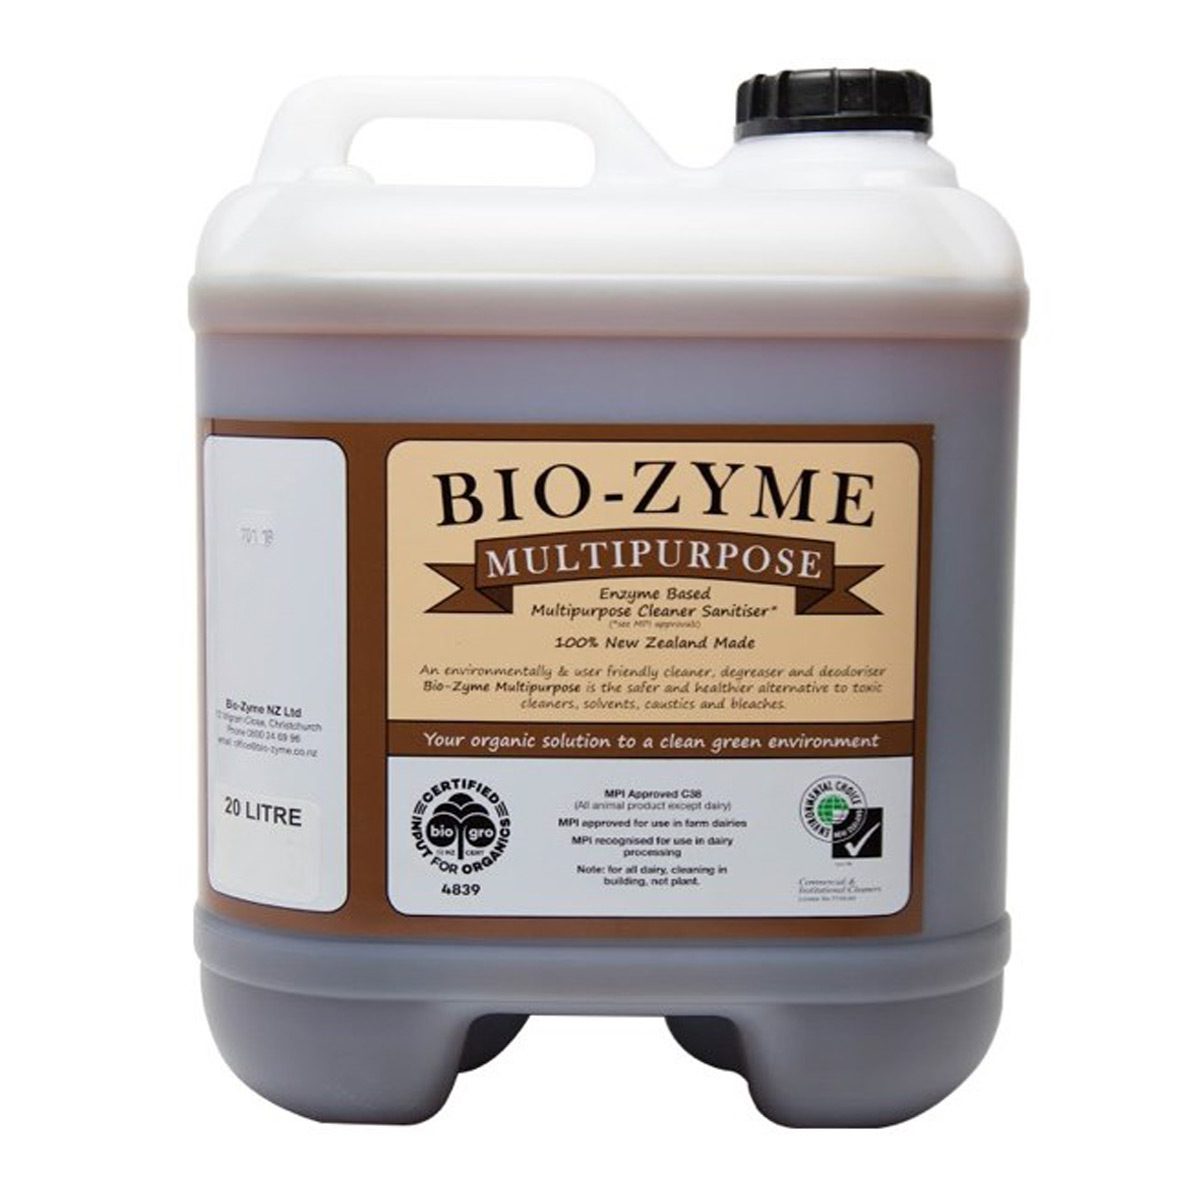 cleaning-products-environmental-bio-zyme-multipurpose-20L-litre-clean-floors-walls-benches-all-food-processing-equipment-neutralises-contaminants-as-biodegradable-cleaner-vjs-distributors-BZMULTI20